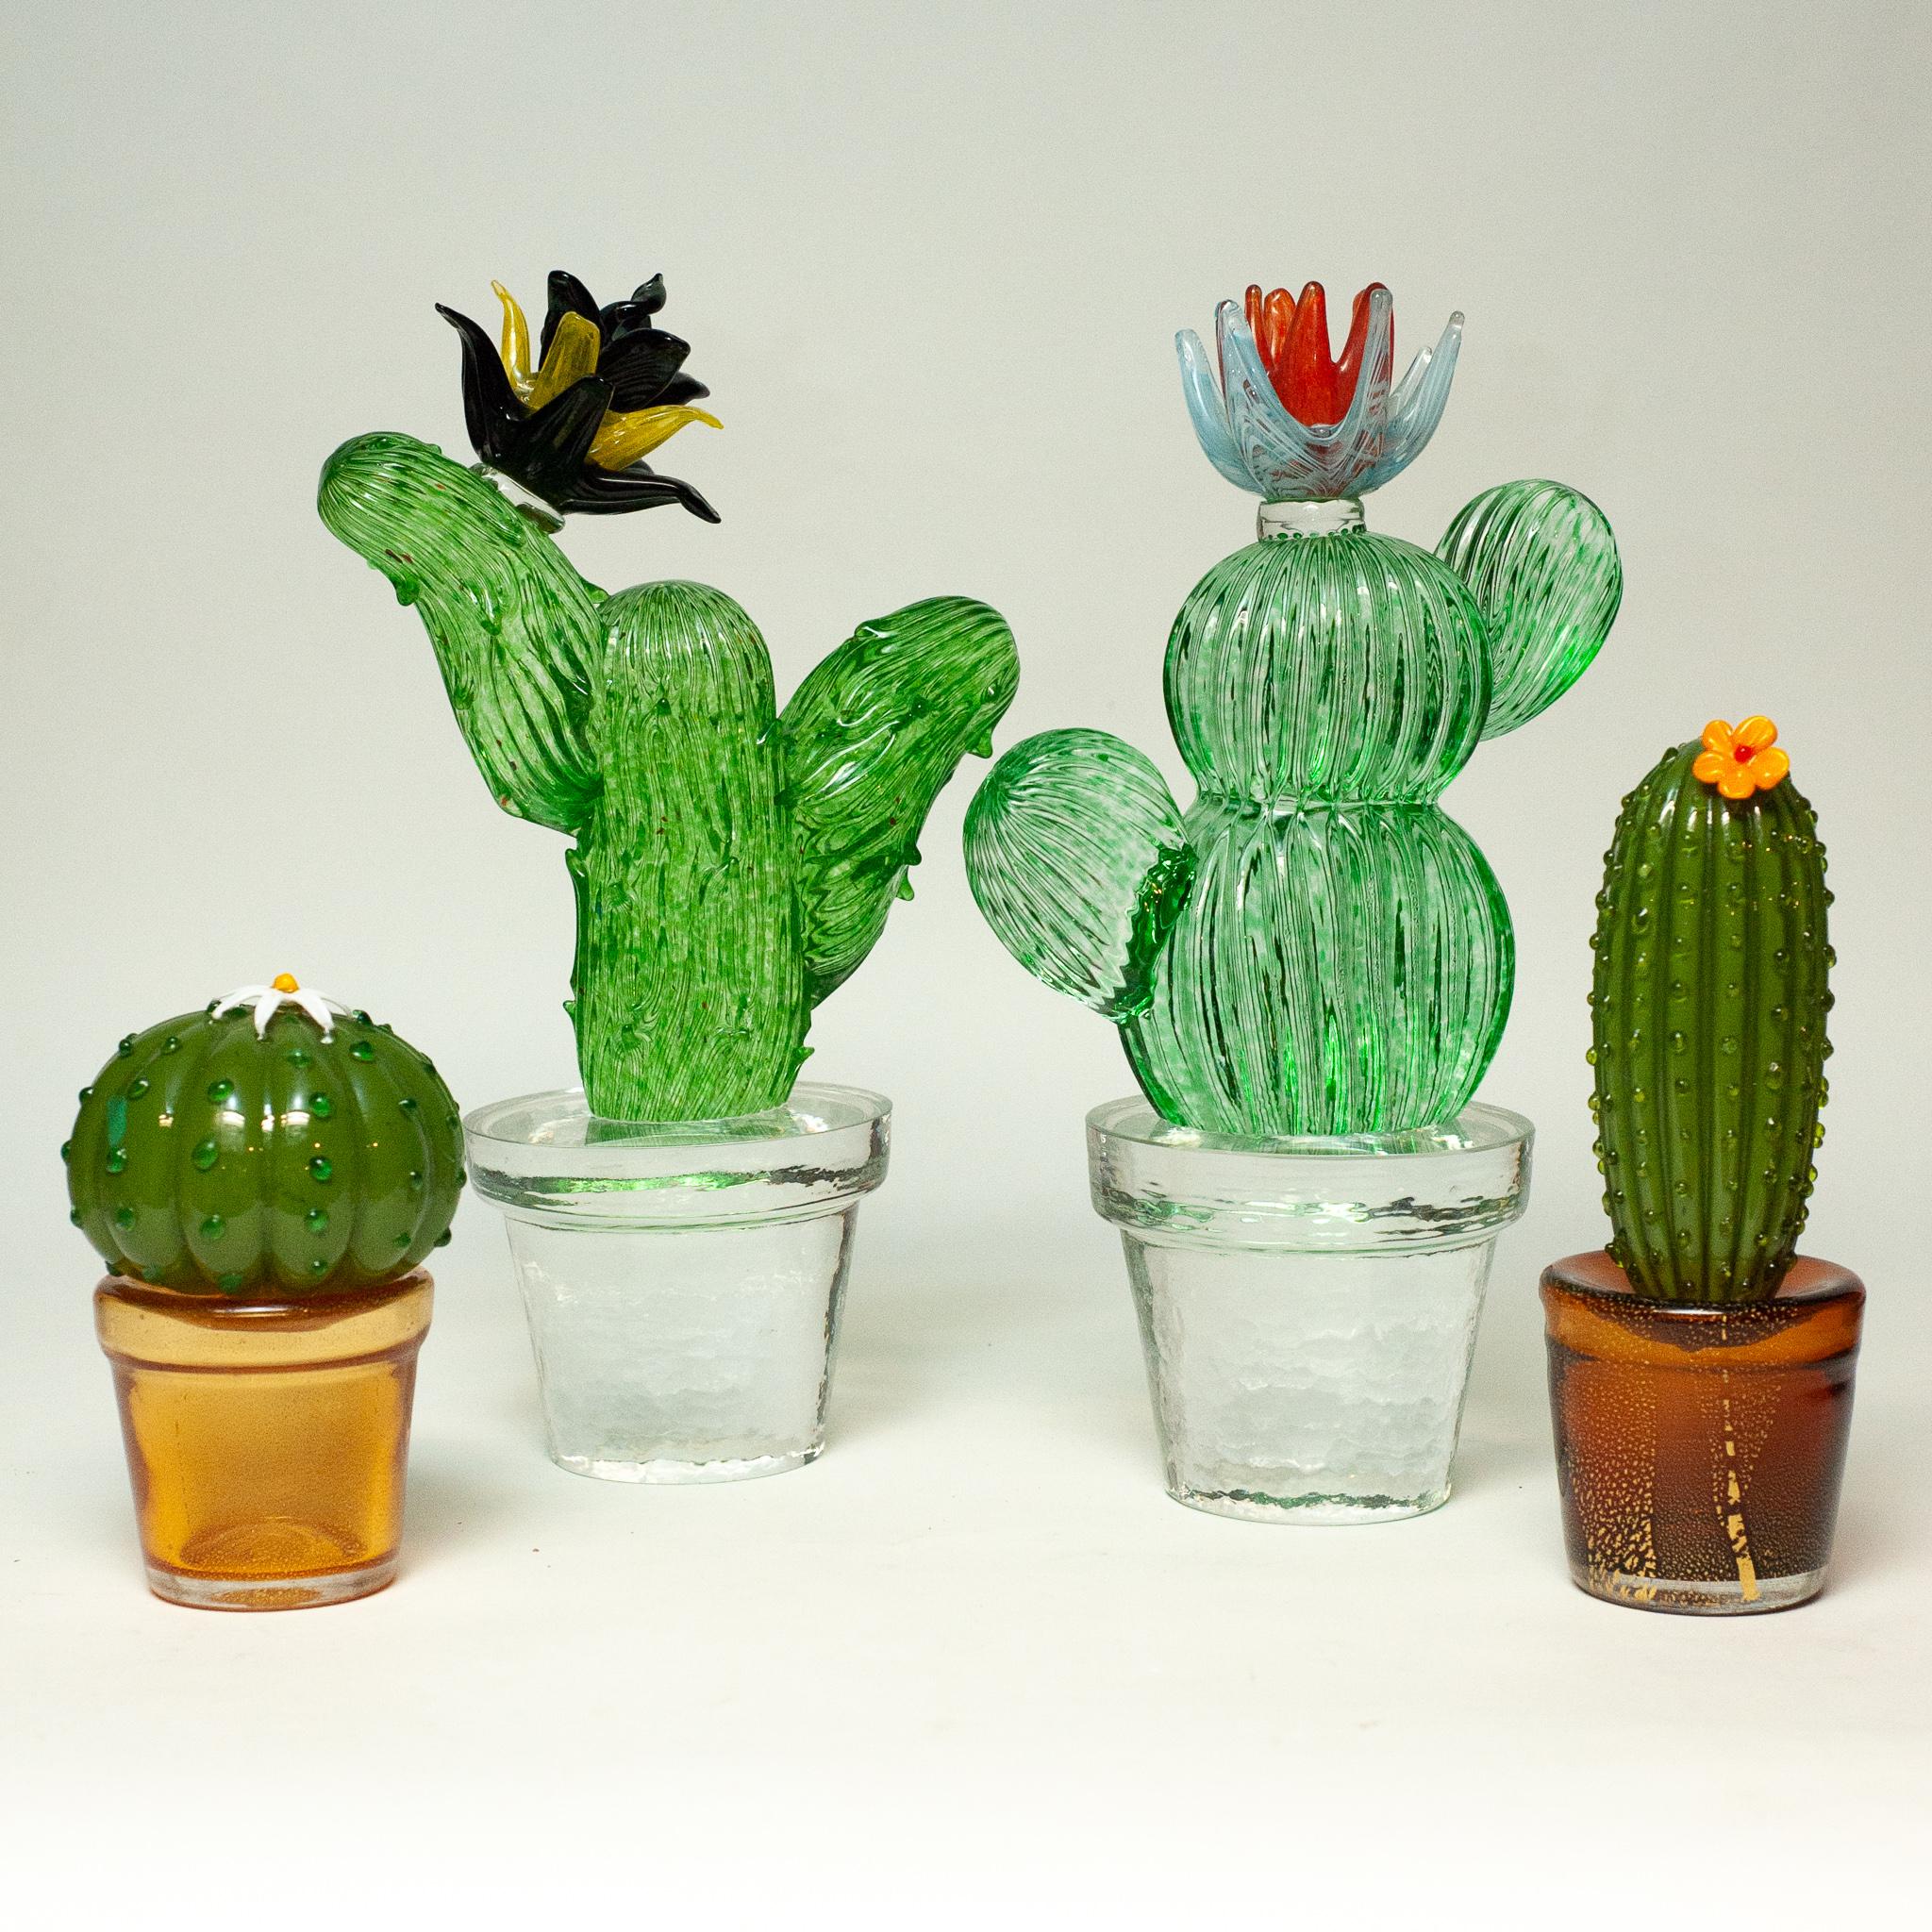 A stunning group of vintage signed Marta Marzotto murano glass cactuses circa 1990 just arrived at Maison Nurita. Entirely handblown in glass, these unusual and vibrant sculptures were made by the famed Italian fashion and jewelry designer. They are